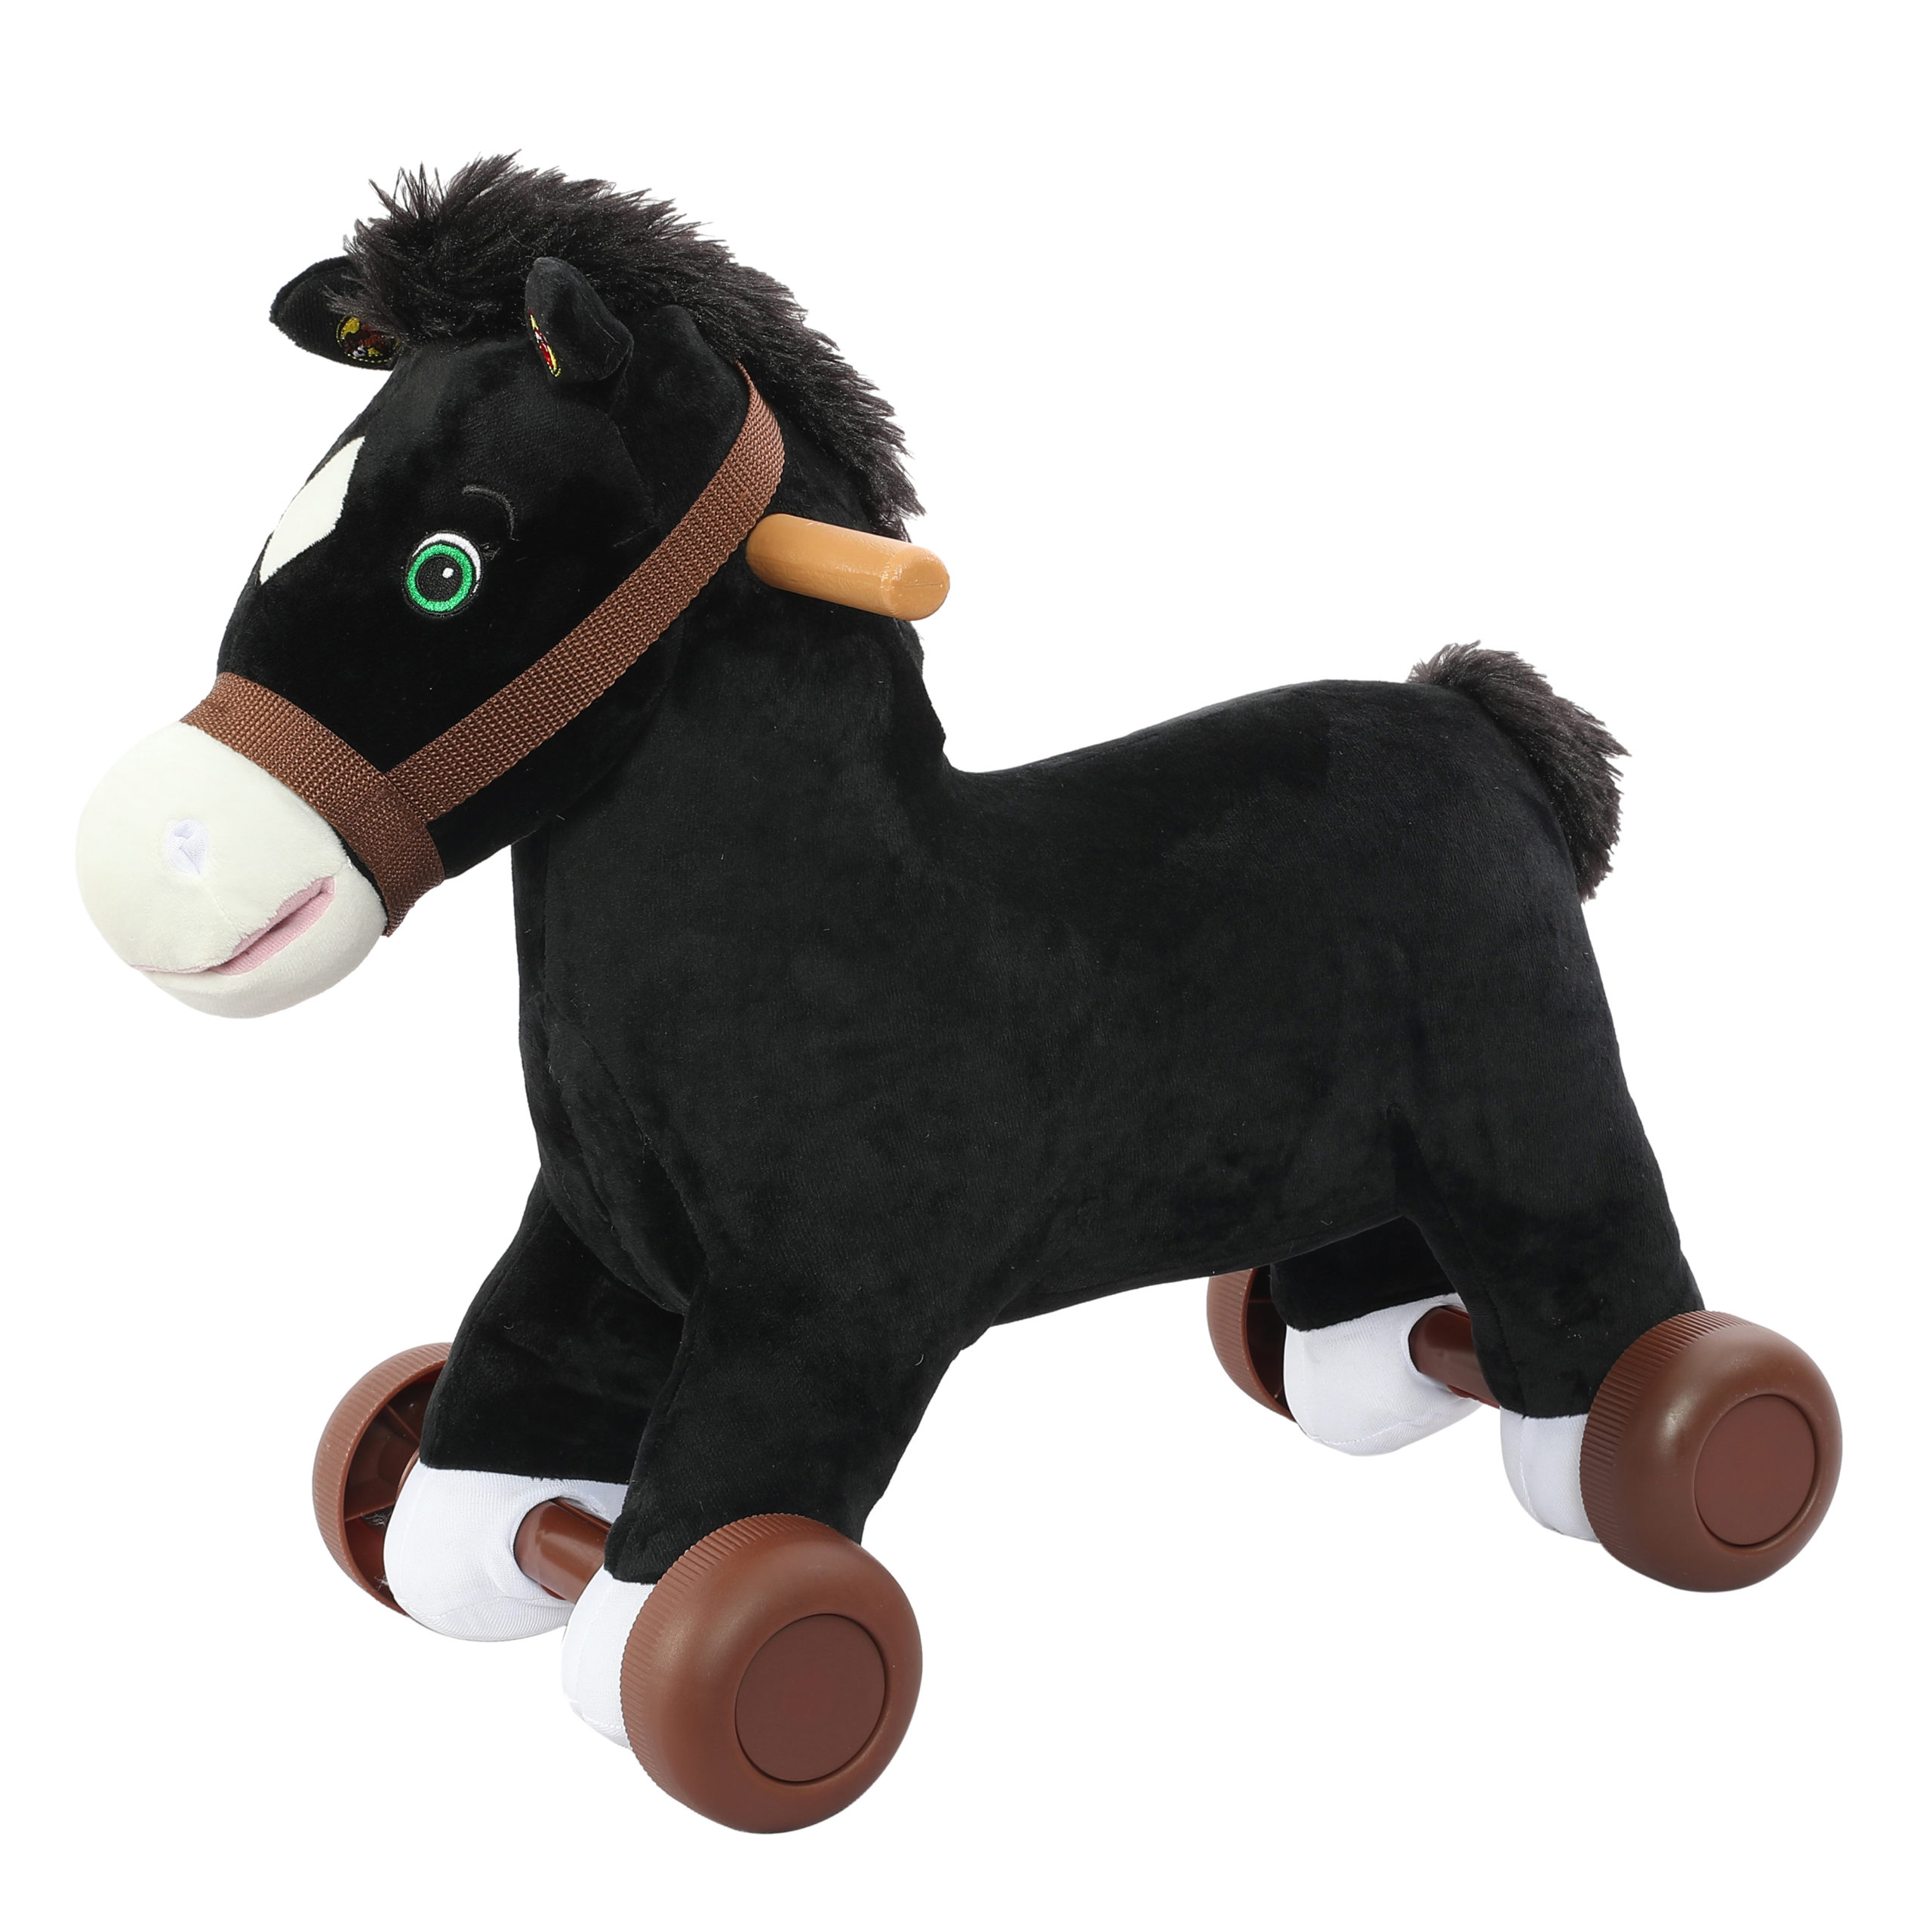 ROCKING ROLLING HORSE PONY Soft Plush Brown Nonslip Step Battery Included 